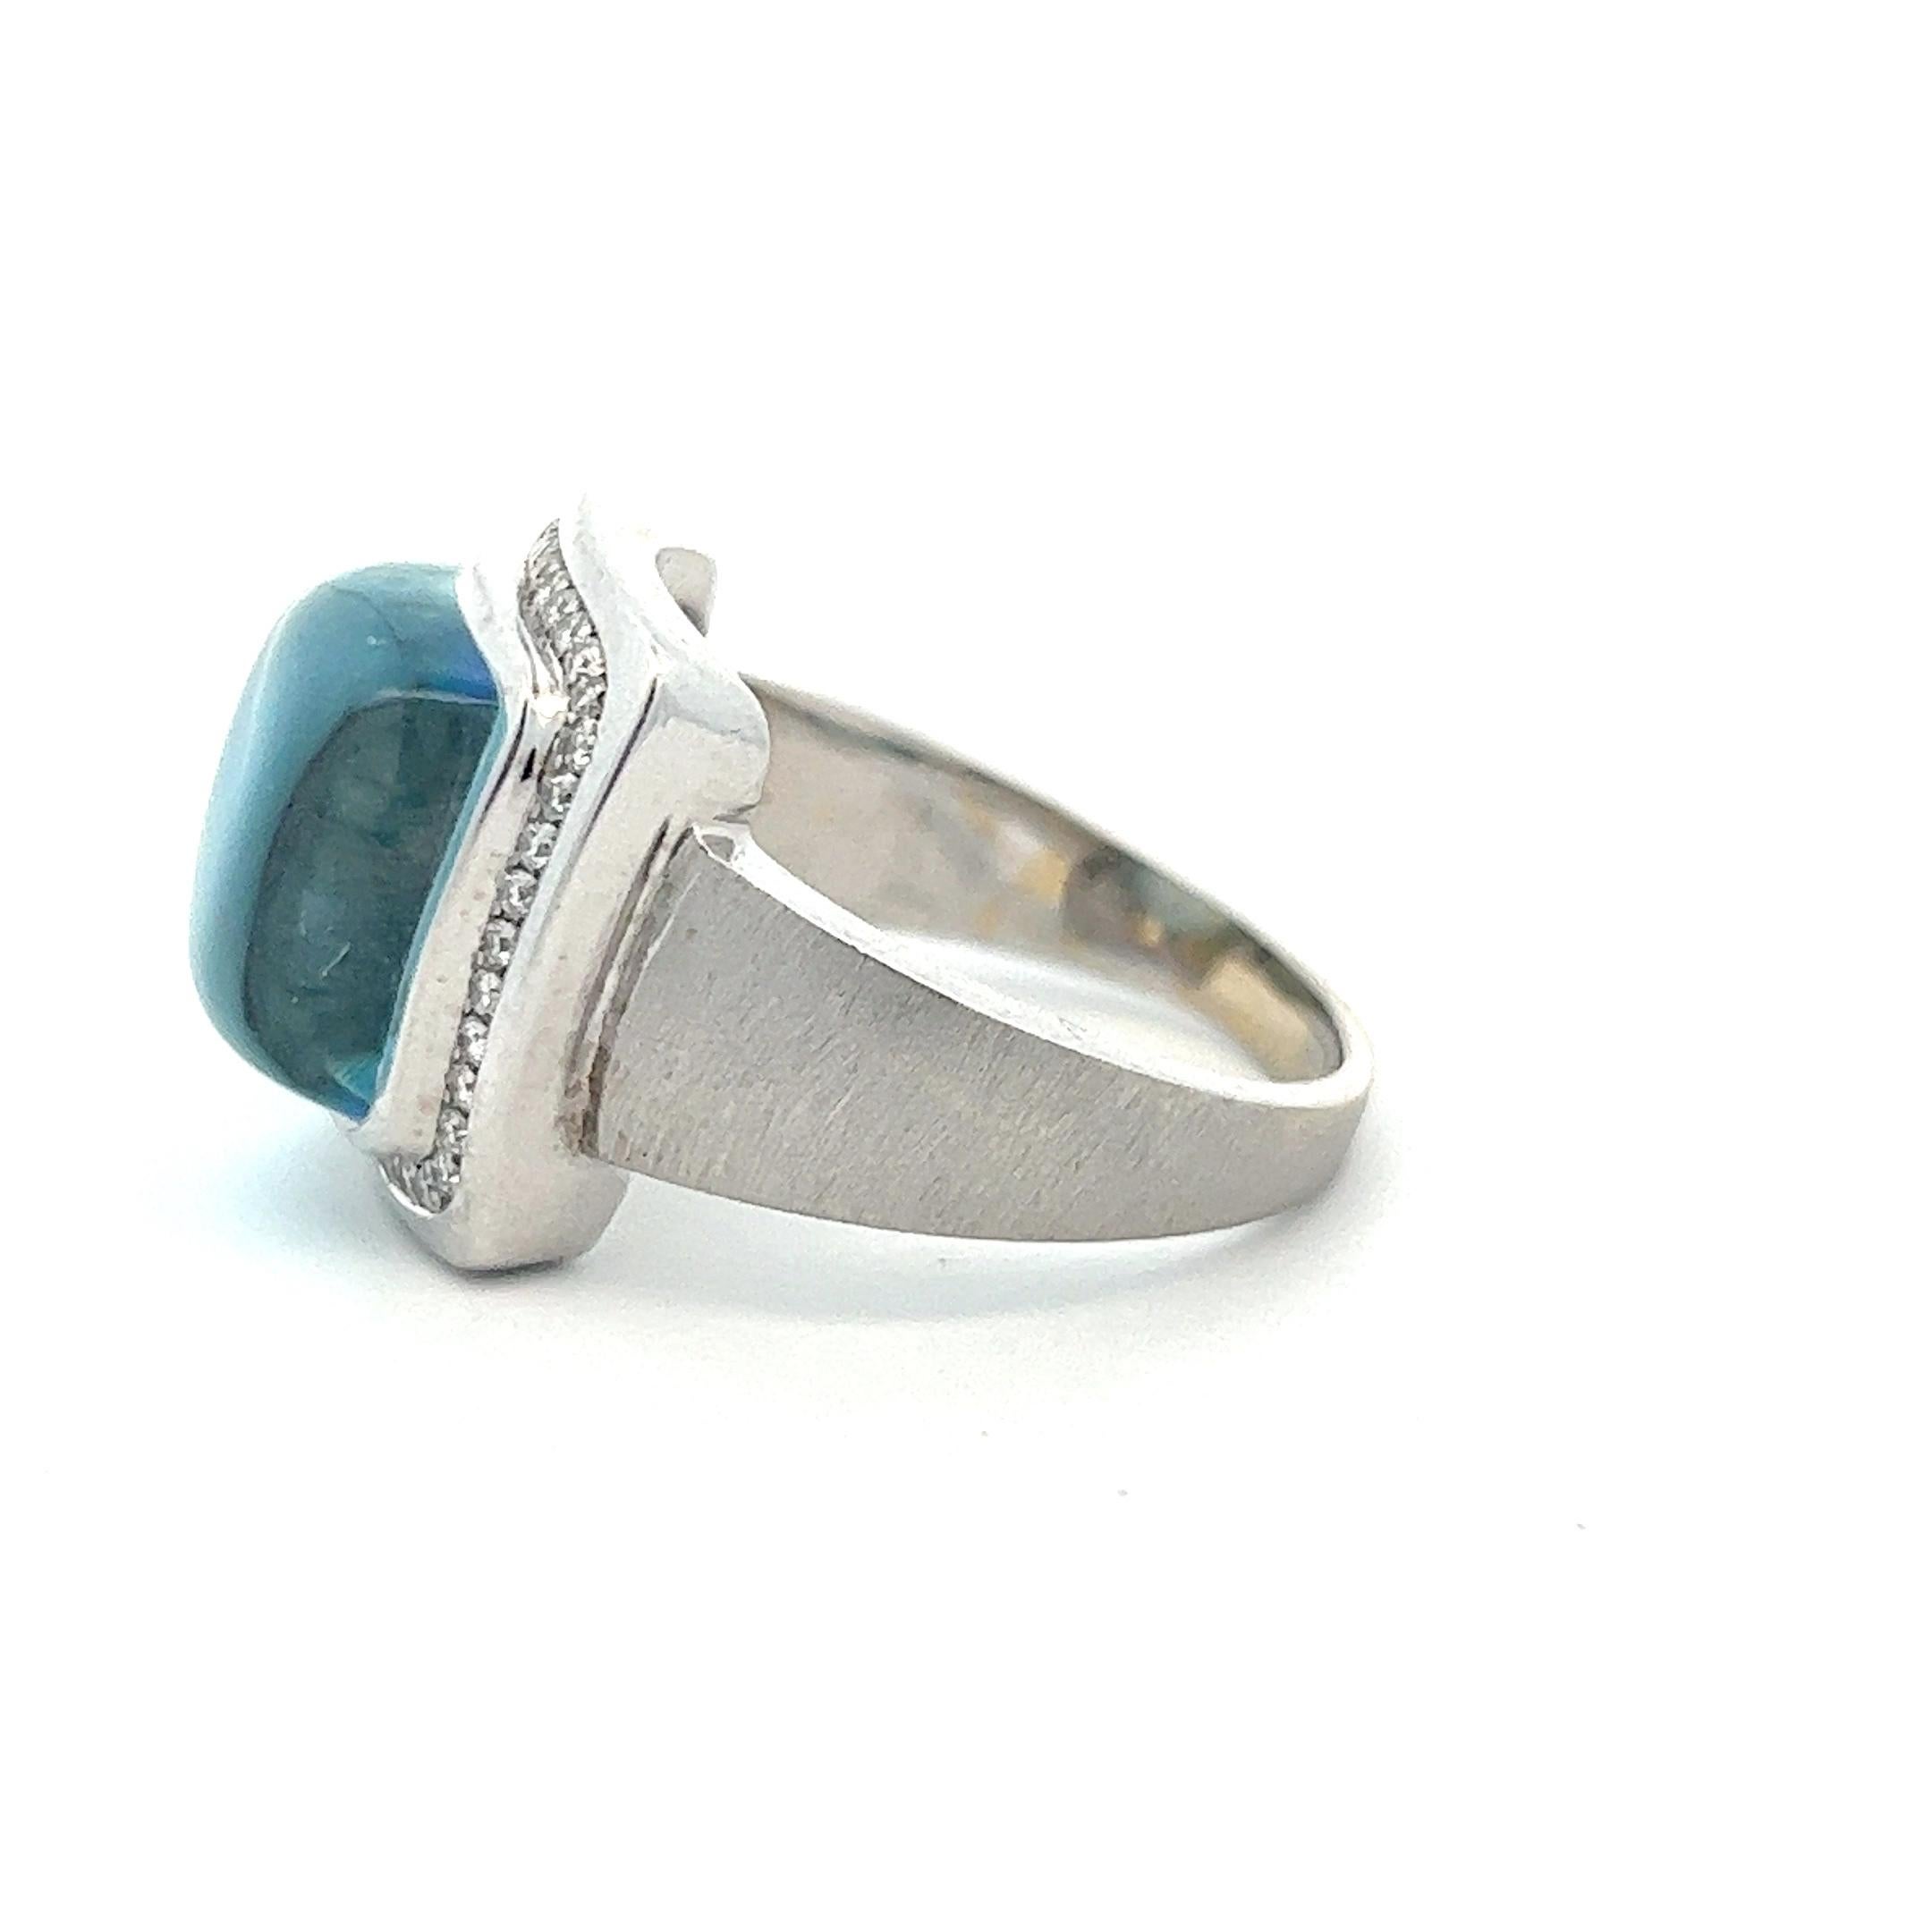 A beautiful cabochon blue topaz set within a halo of small small diamonds in an 18k white gold setting. The topaz is a peaceful sky blue and, measured in setting, weighs approximately 14.79 carats. The ring is crafted of 18k white gold with a